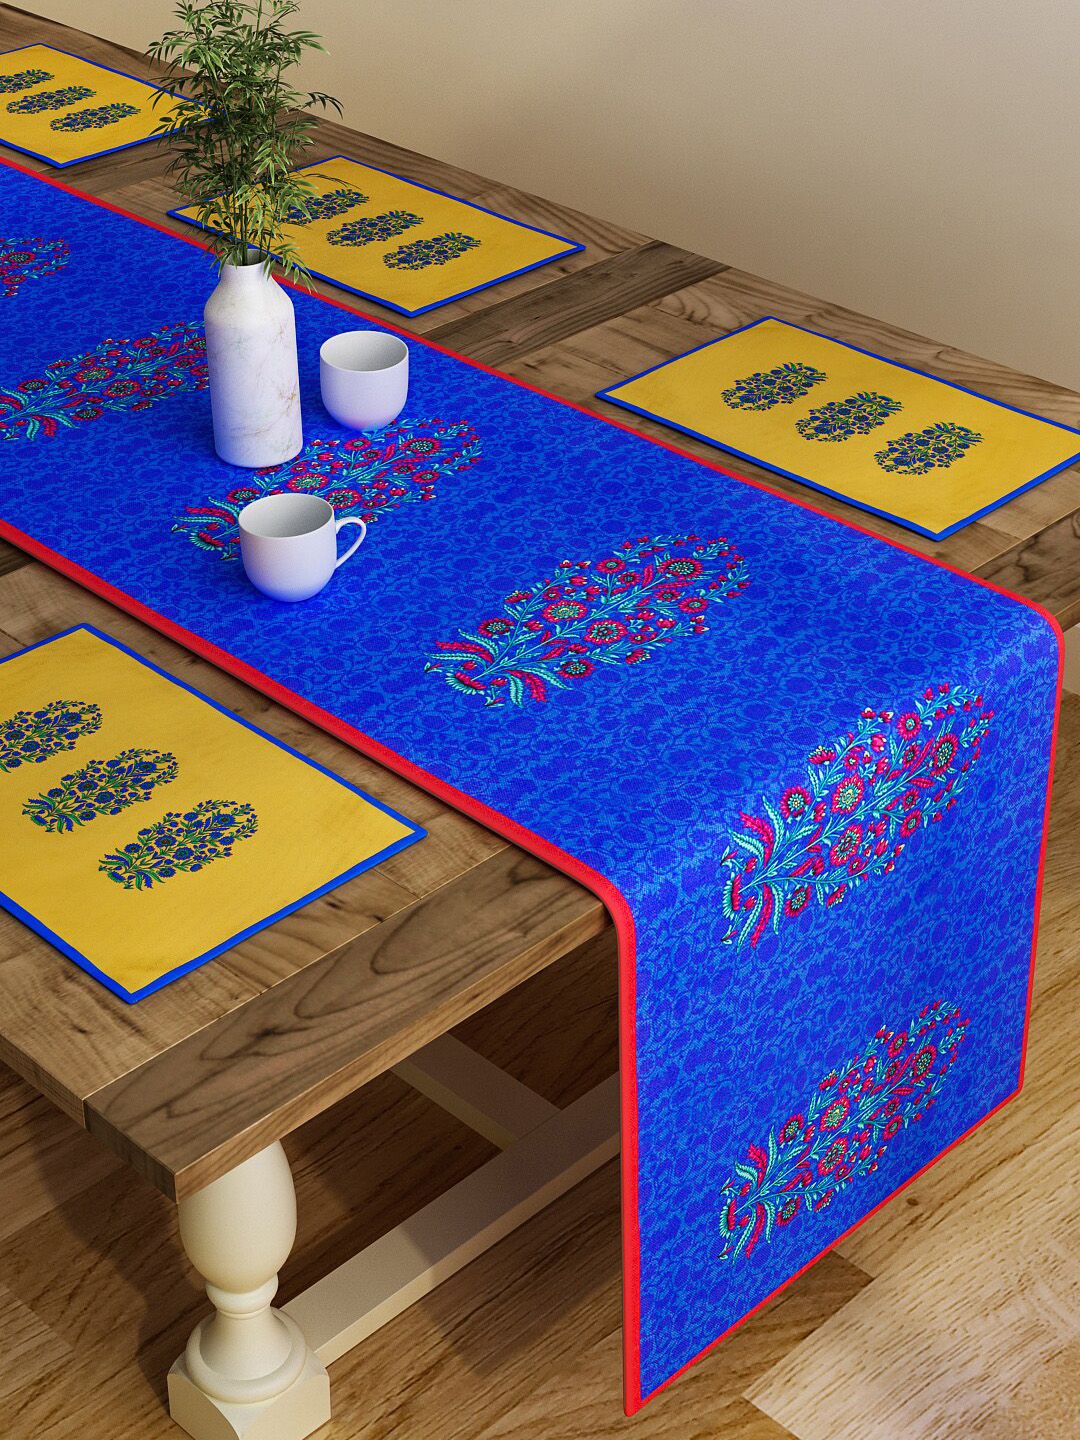 SEJ by Nisha Gupta Set of 7 Blue & Red Table Placemats & Runner Price in India